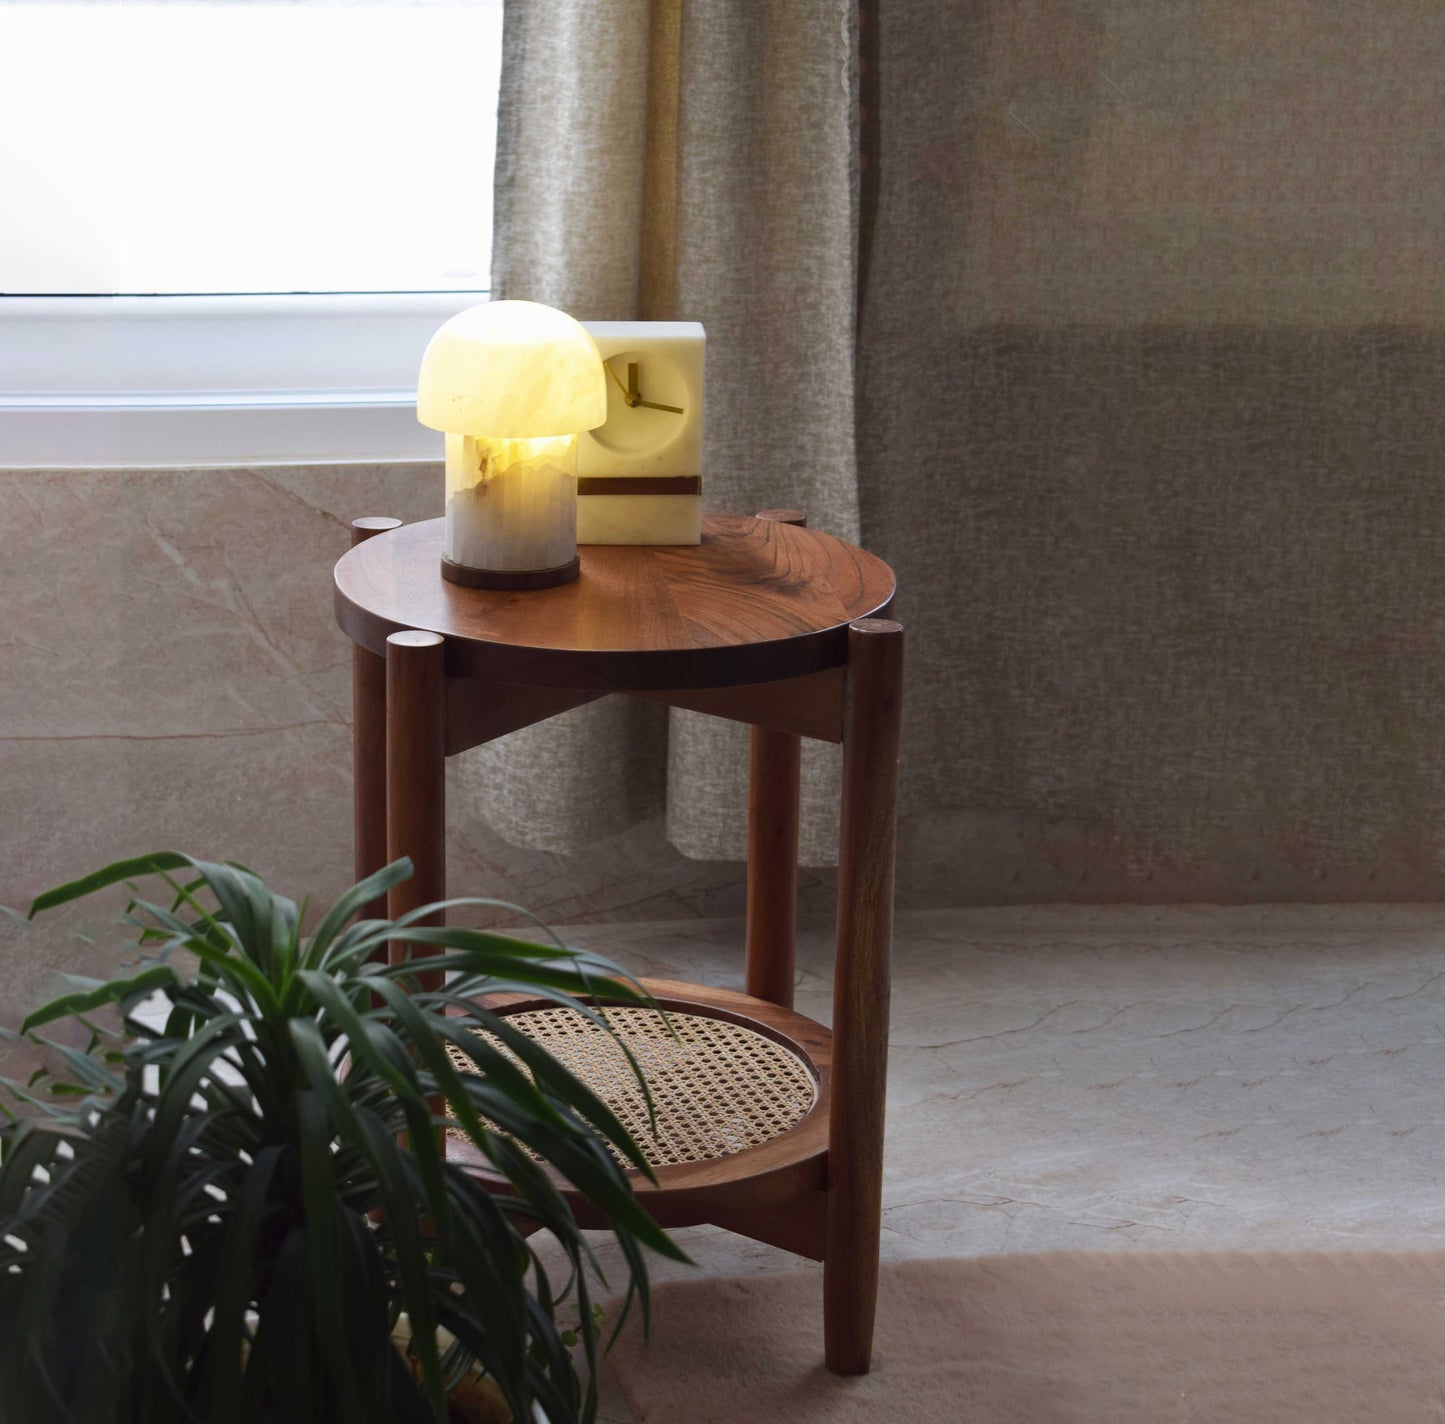 Cane & wooden side table